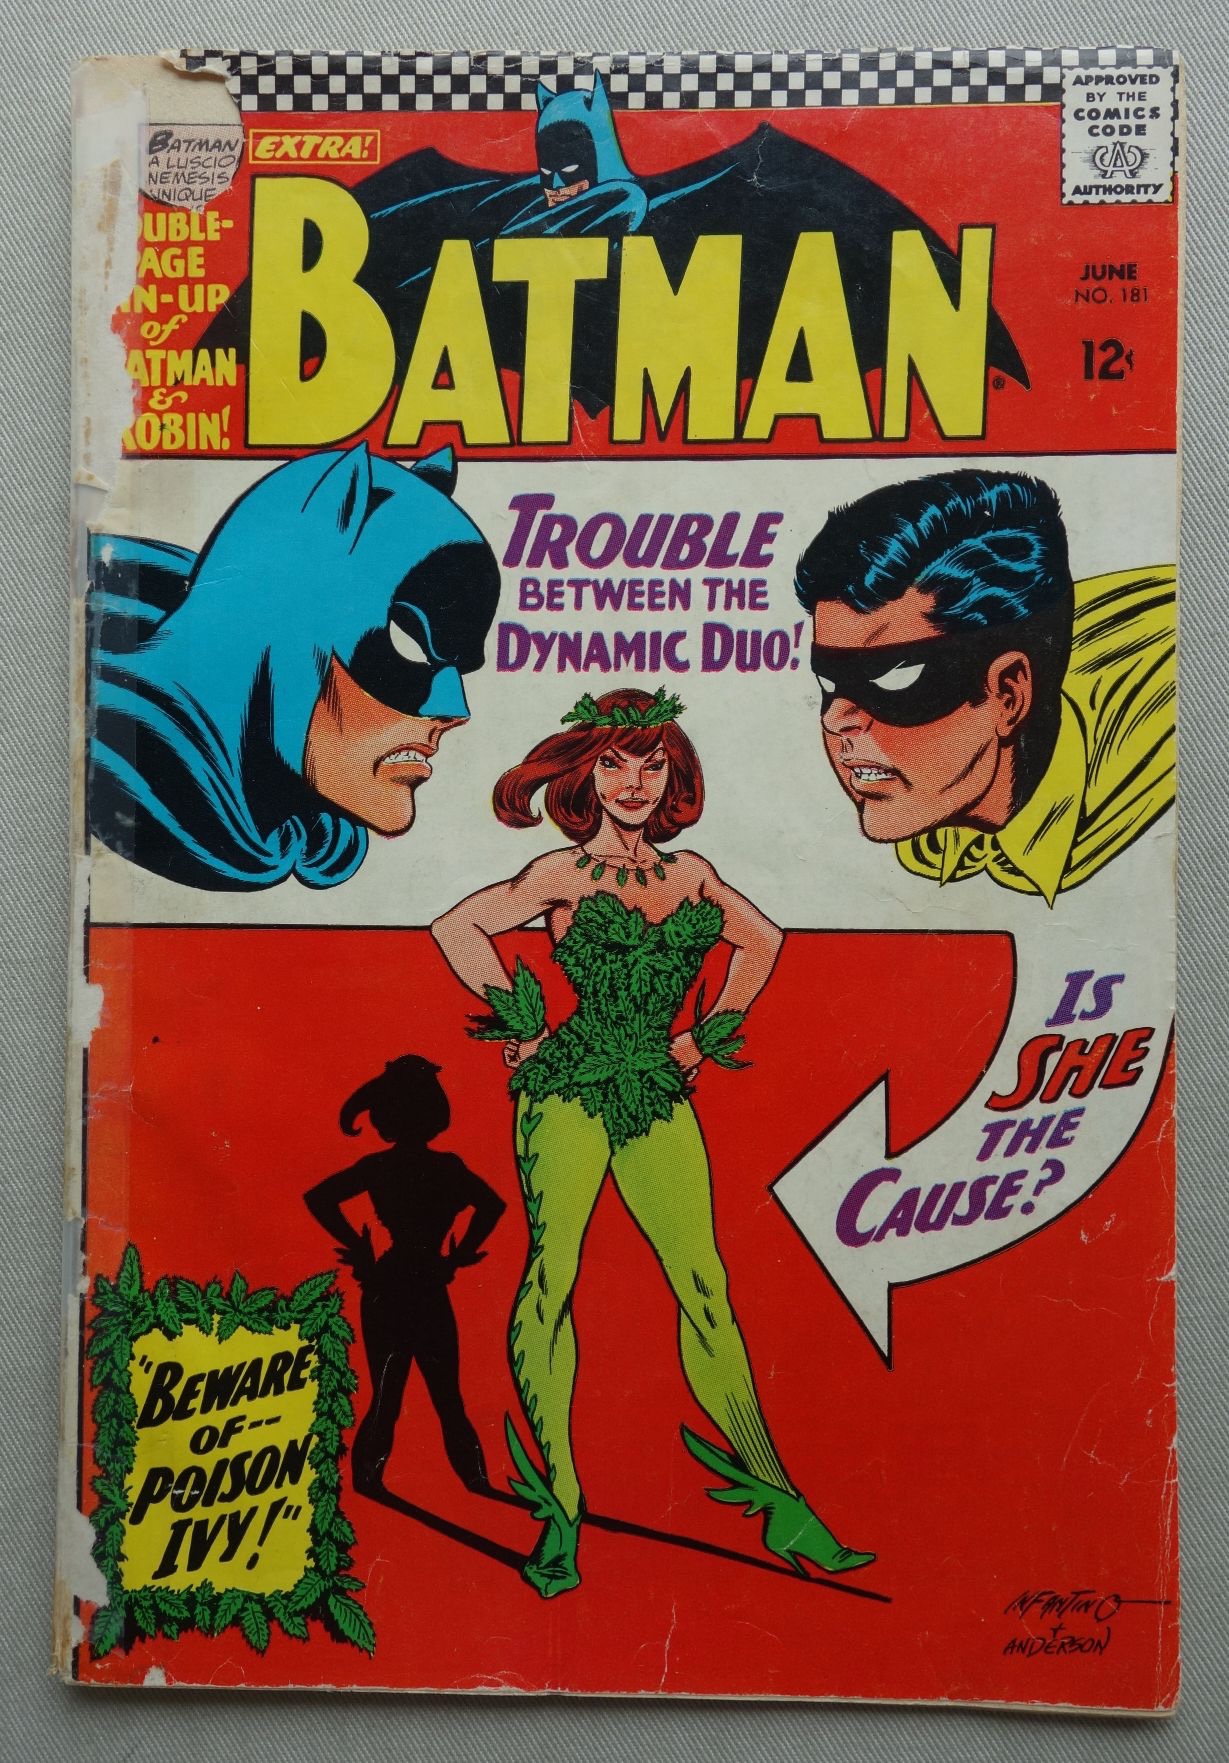 Batman #181 - June 1966 - the first to feature Poison Ivy